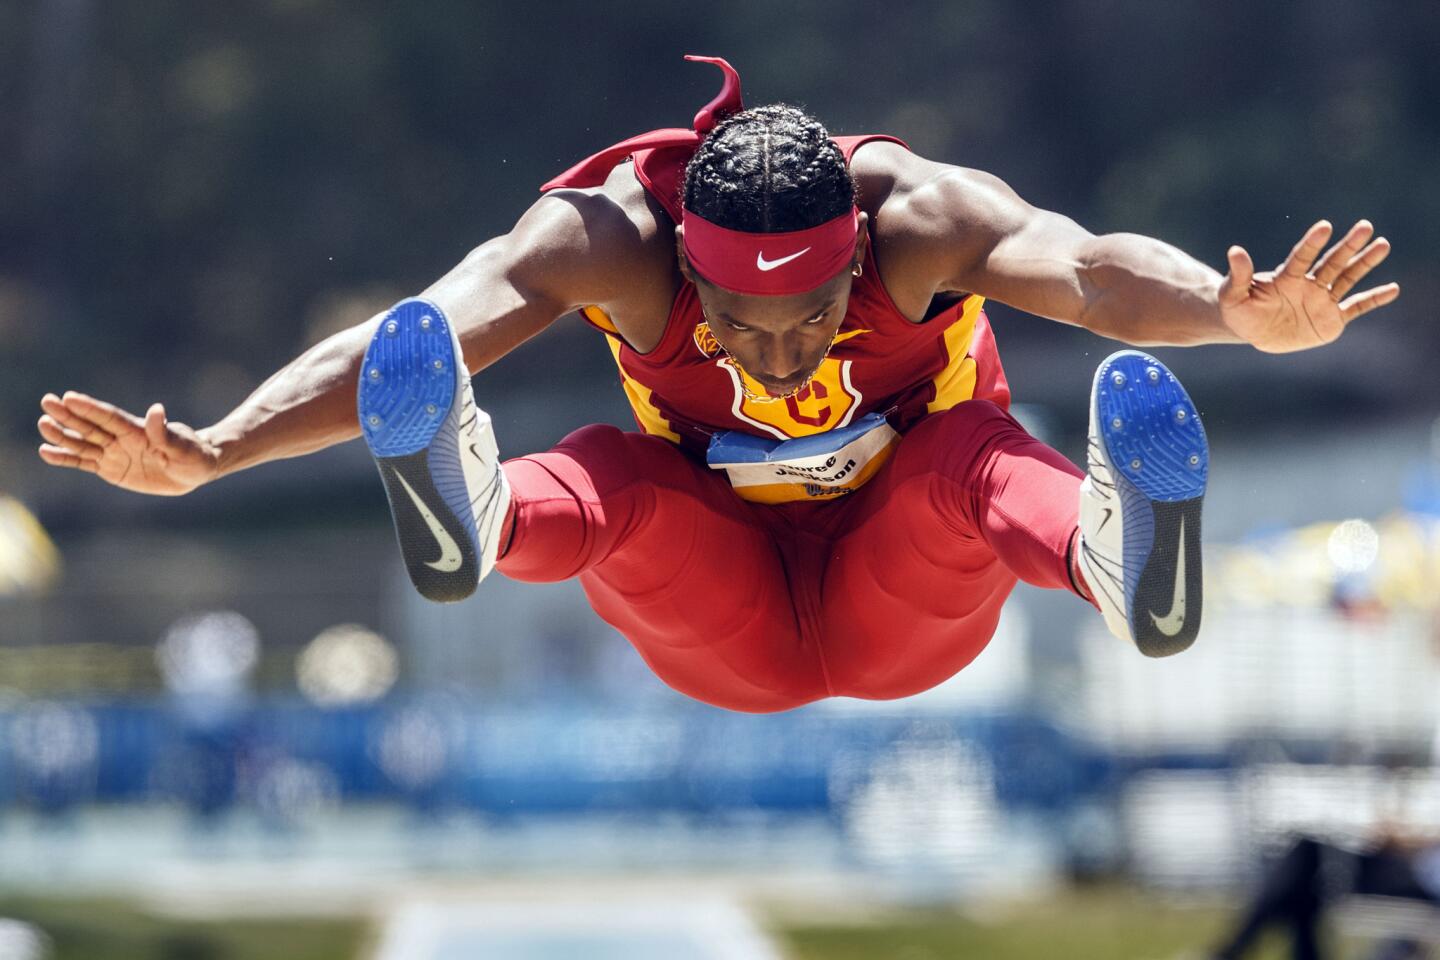 USC long jumper Adoree' Jackson is within leaping distance of Olympic trials